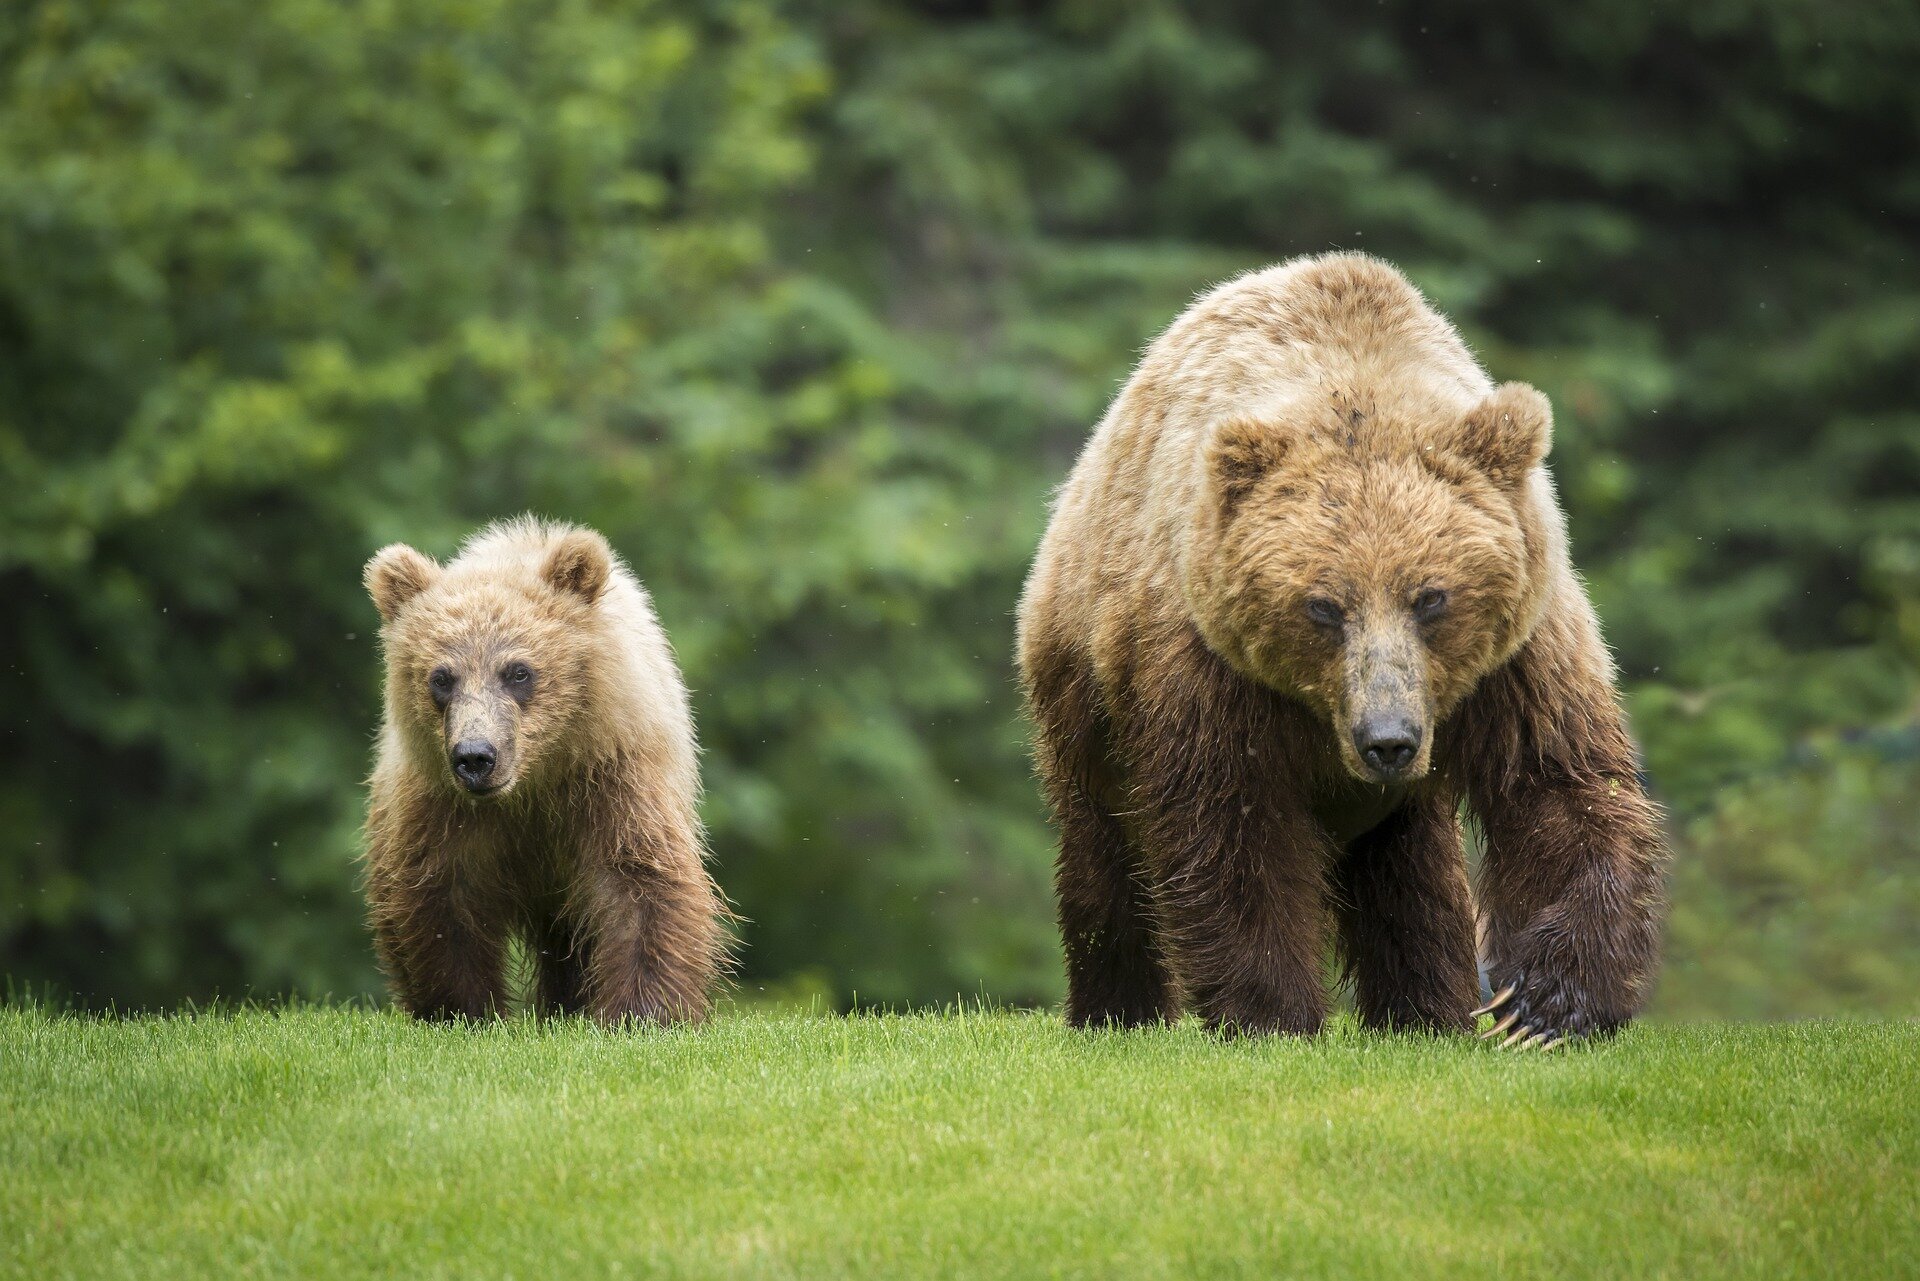 US: mountain pine tree that feeds grizzlies is threatened